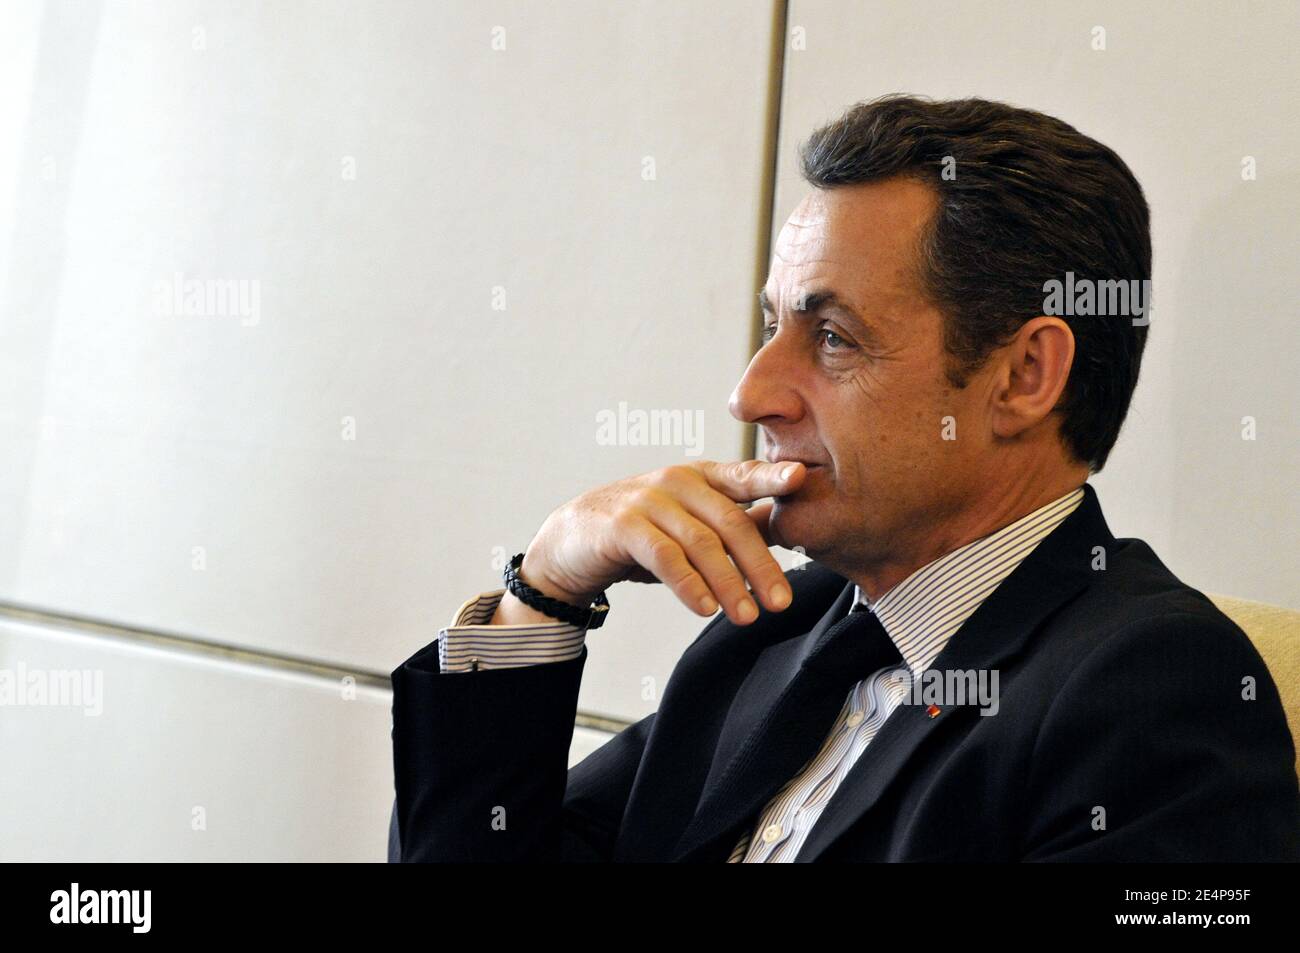 French President Nicolas Sarkozy listens to Congress Party President Sonia Gandhi during their meeting in New Delhi, on January 25, 2008, on the first day of Sarkozy's two-day state visit to India. Photo by Elodie Gregoire/ABACAPRESS.COM Stock Photo